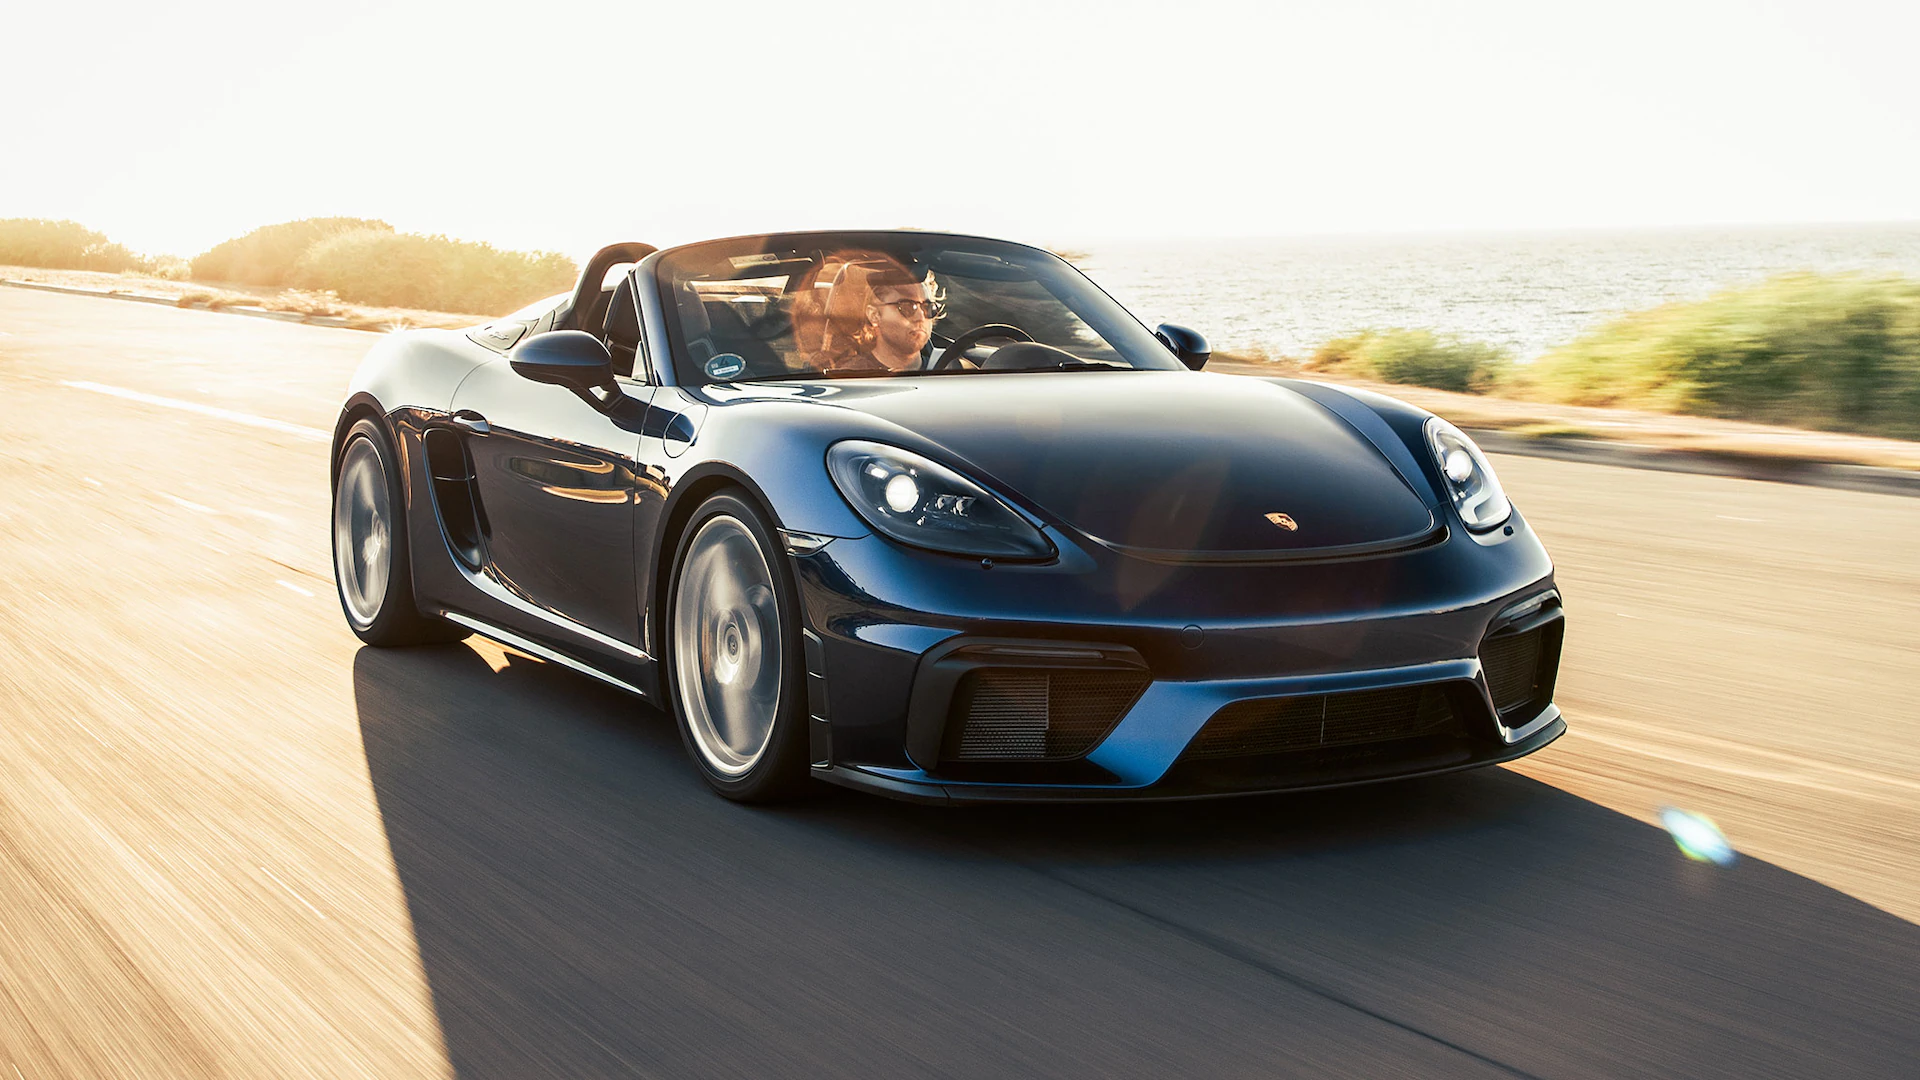 Porsche 718 Boxster Spyder FRONT ANGULAR VIEW ON THE ROAD